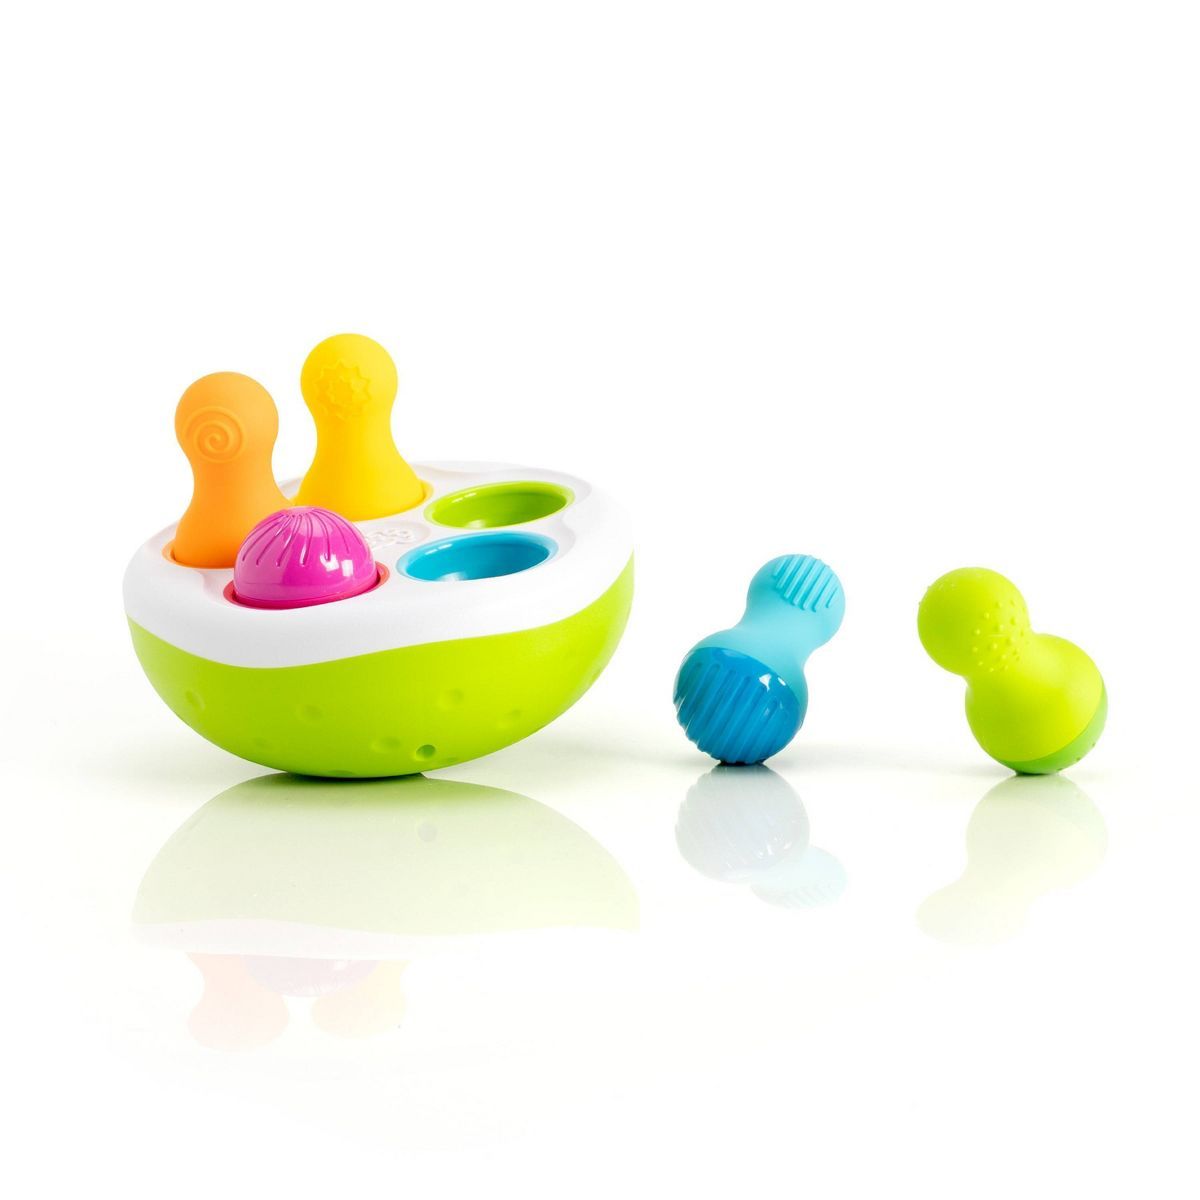 Fat Brain Toys SpinnyPins Toy | Target